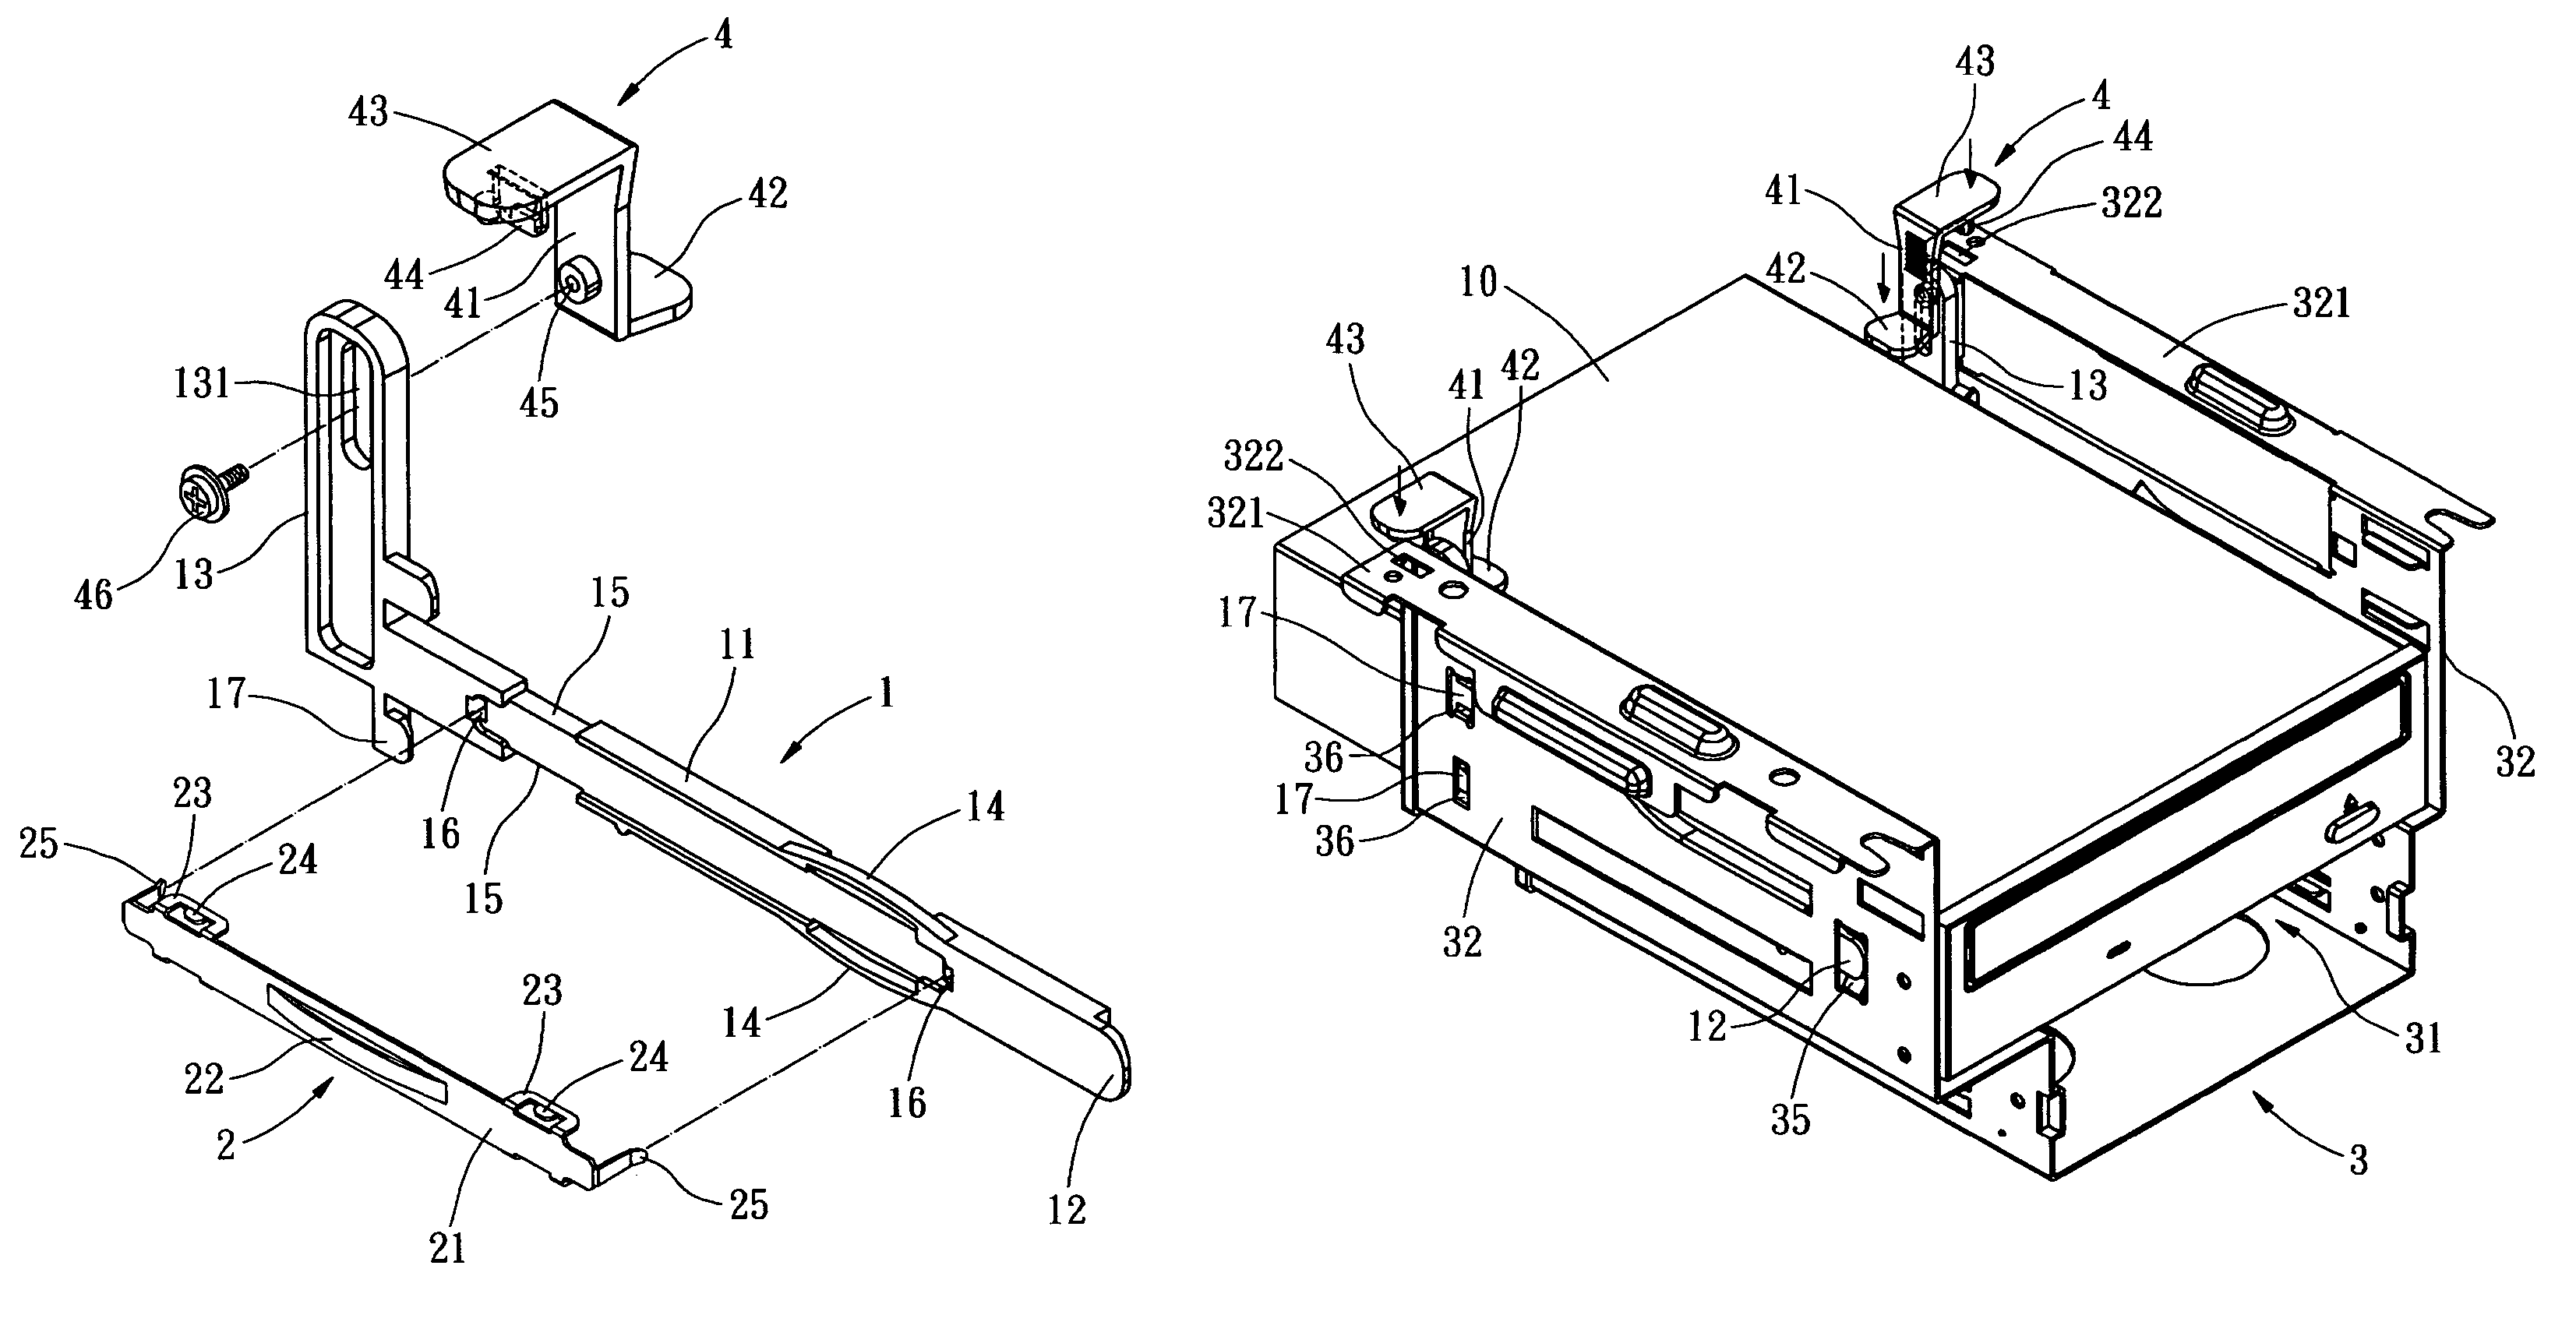 Clip-on hanger for electrical data storage and retrieval device